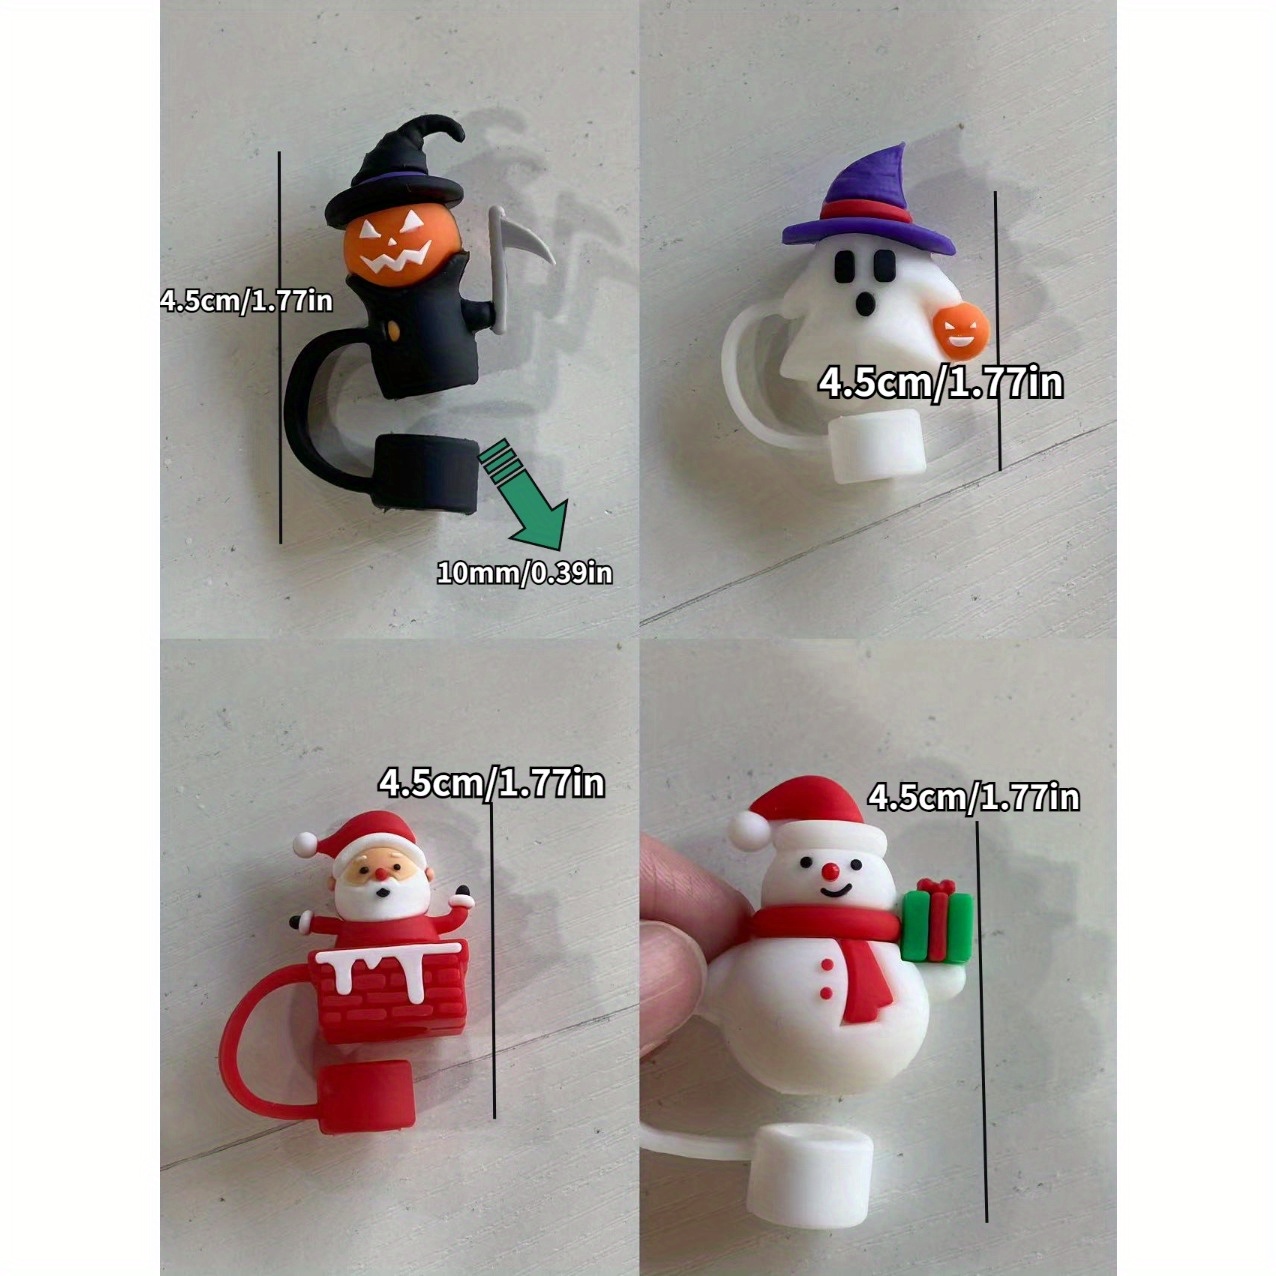 8Pcs Christmas Straw Cover Cup for Tumbler Cup, 10mm Santa Claus Drinking  Straw Topper, Reusable Protectors Straw Tips Lids for Cup Accessories (8Pcs